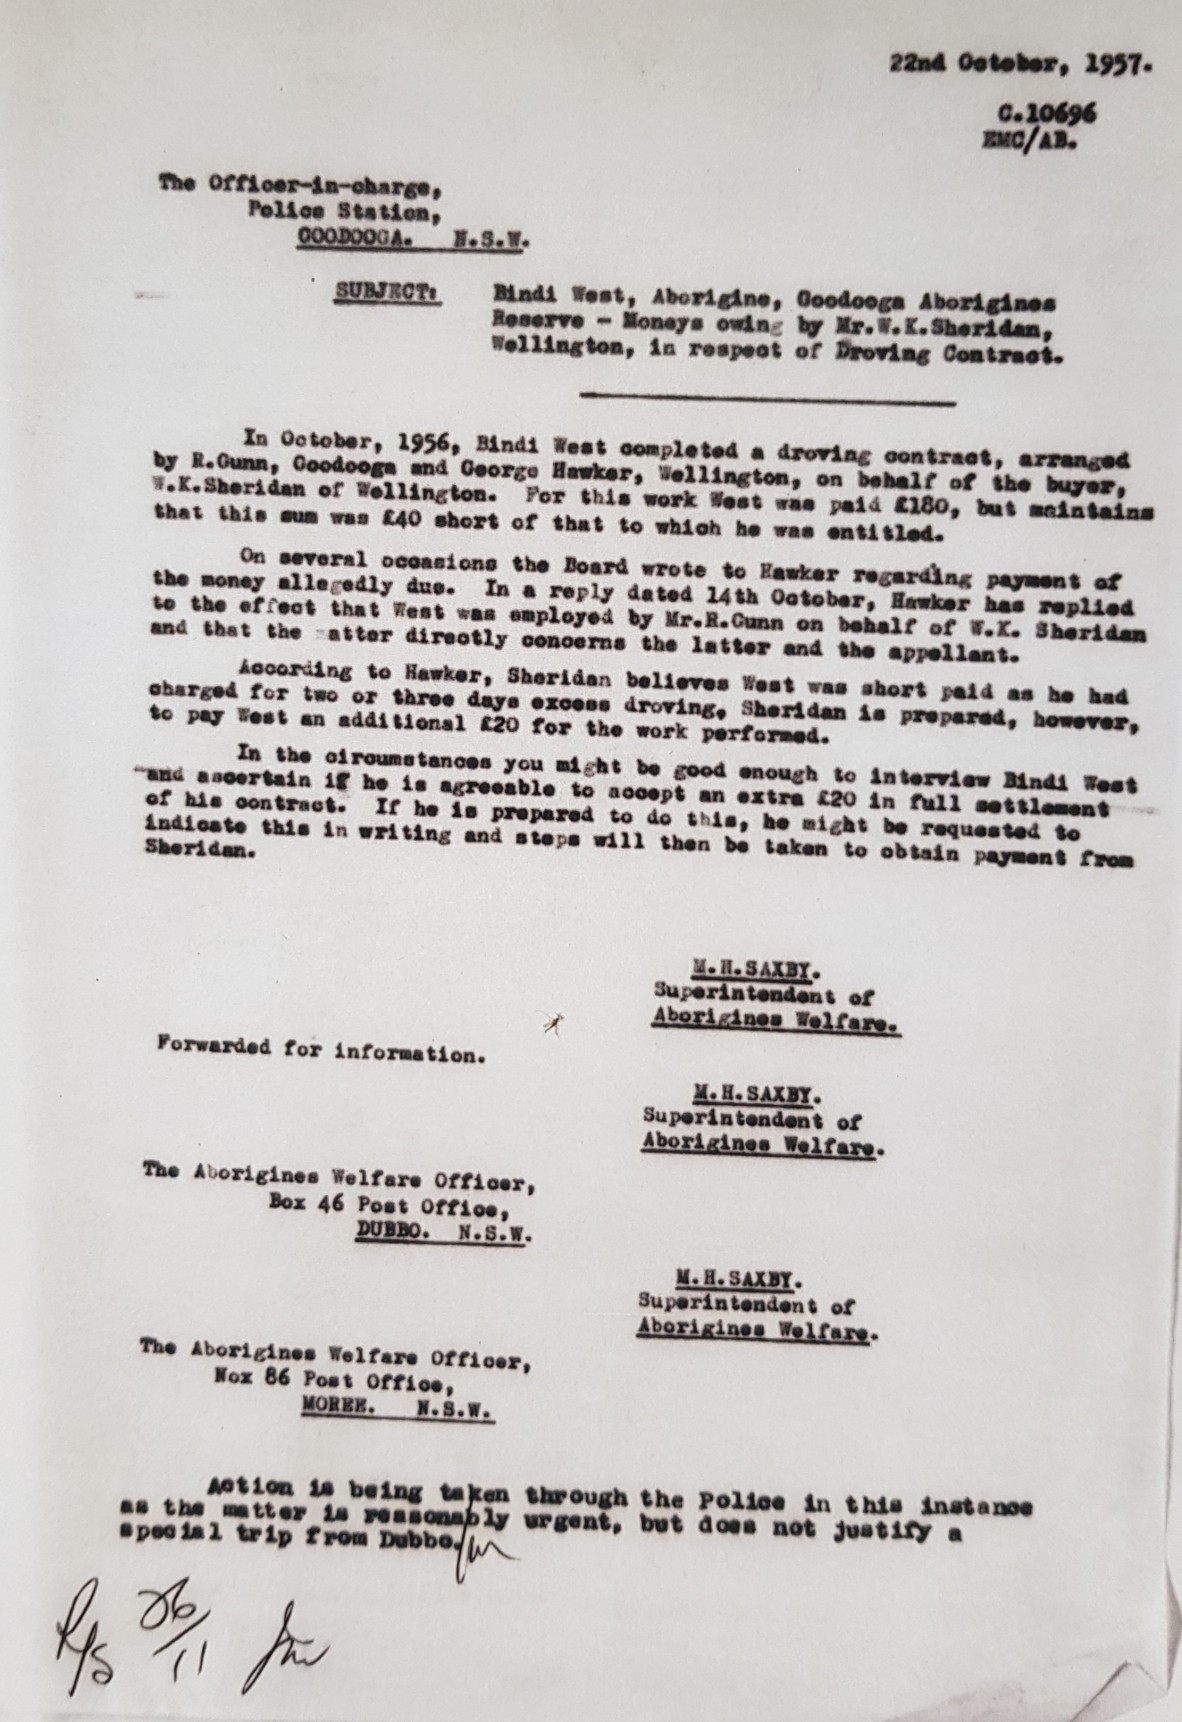 Saxby puts this offer to Bindi West in a letter written on 22nd Oct 1957, and actioned through the Goodooga Police, ‘as the matter is reasonably urgent but does not justify a special trip from Dubbo’ to the Goodooga Aborigines Reserve, where Drover Bindi West lived.   Saxby asks if Bindi West is agreeable to an extra 20 Pound as offered by Sheridan, in full settlement of the droving contract.